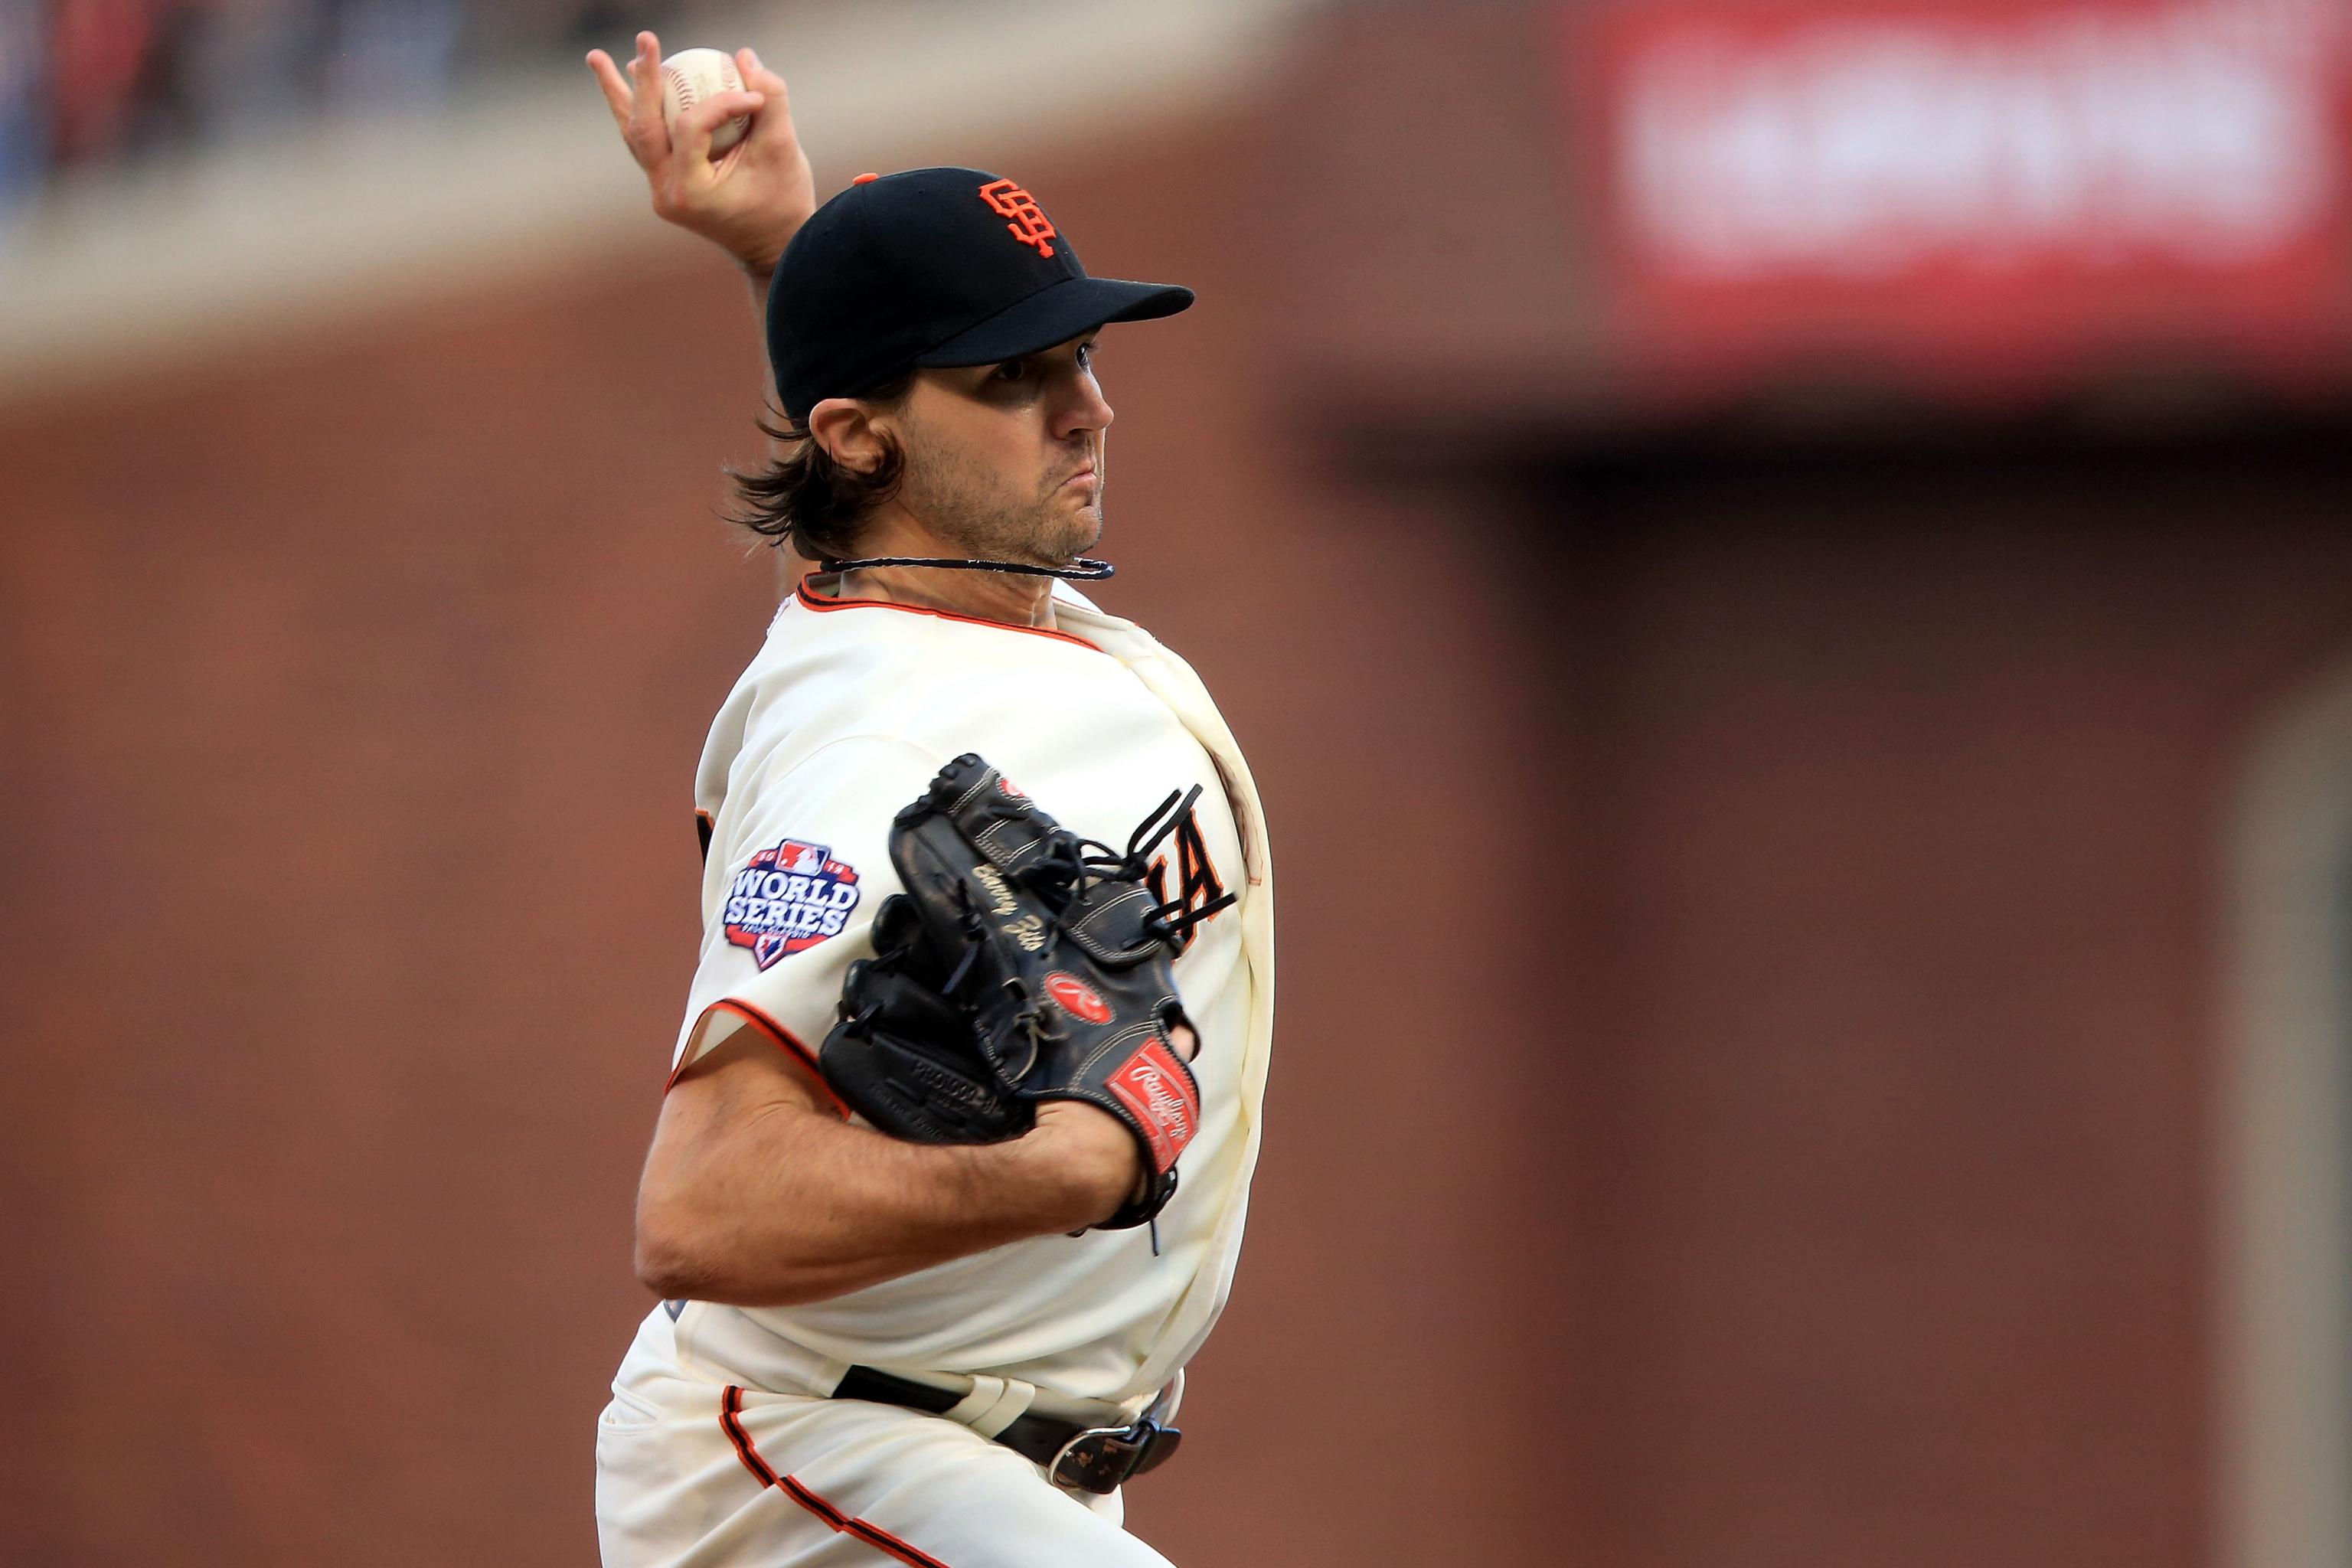 Madison Bumgarner has the right attitude about his contract